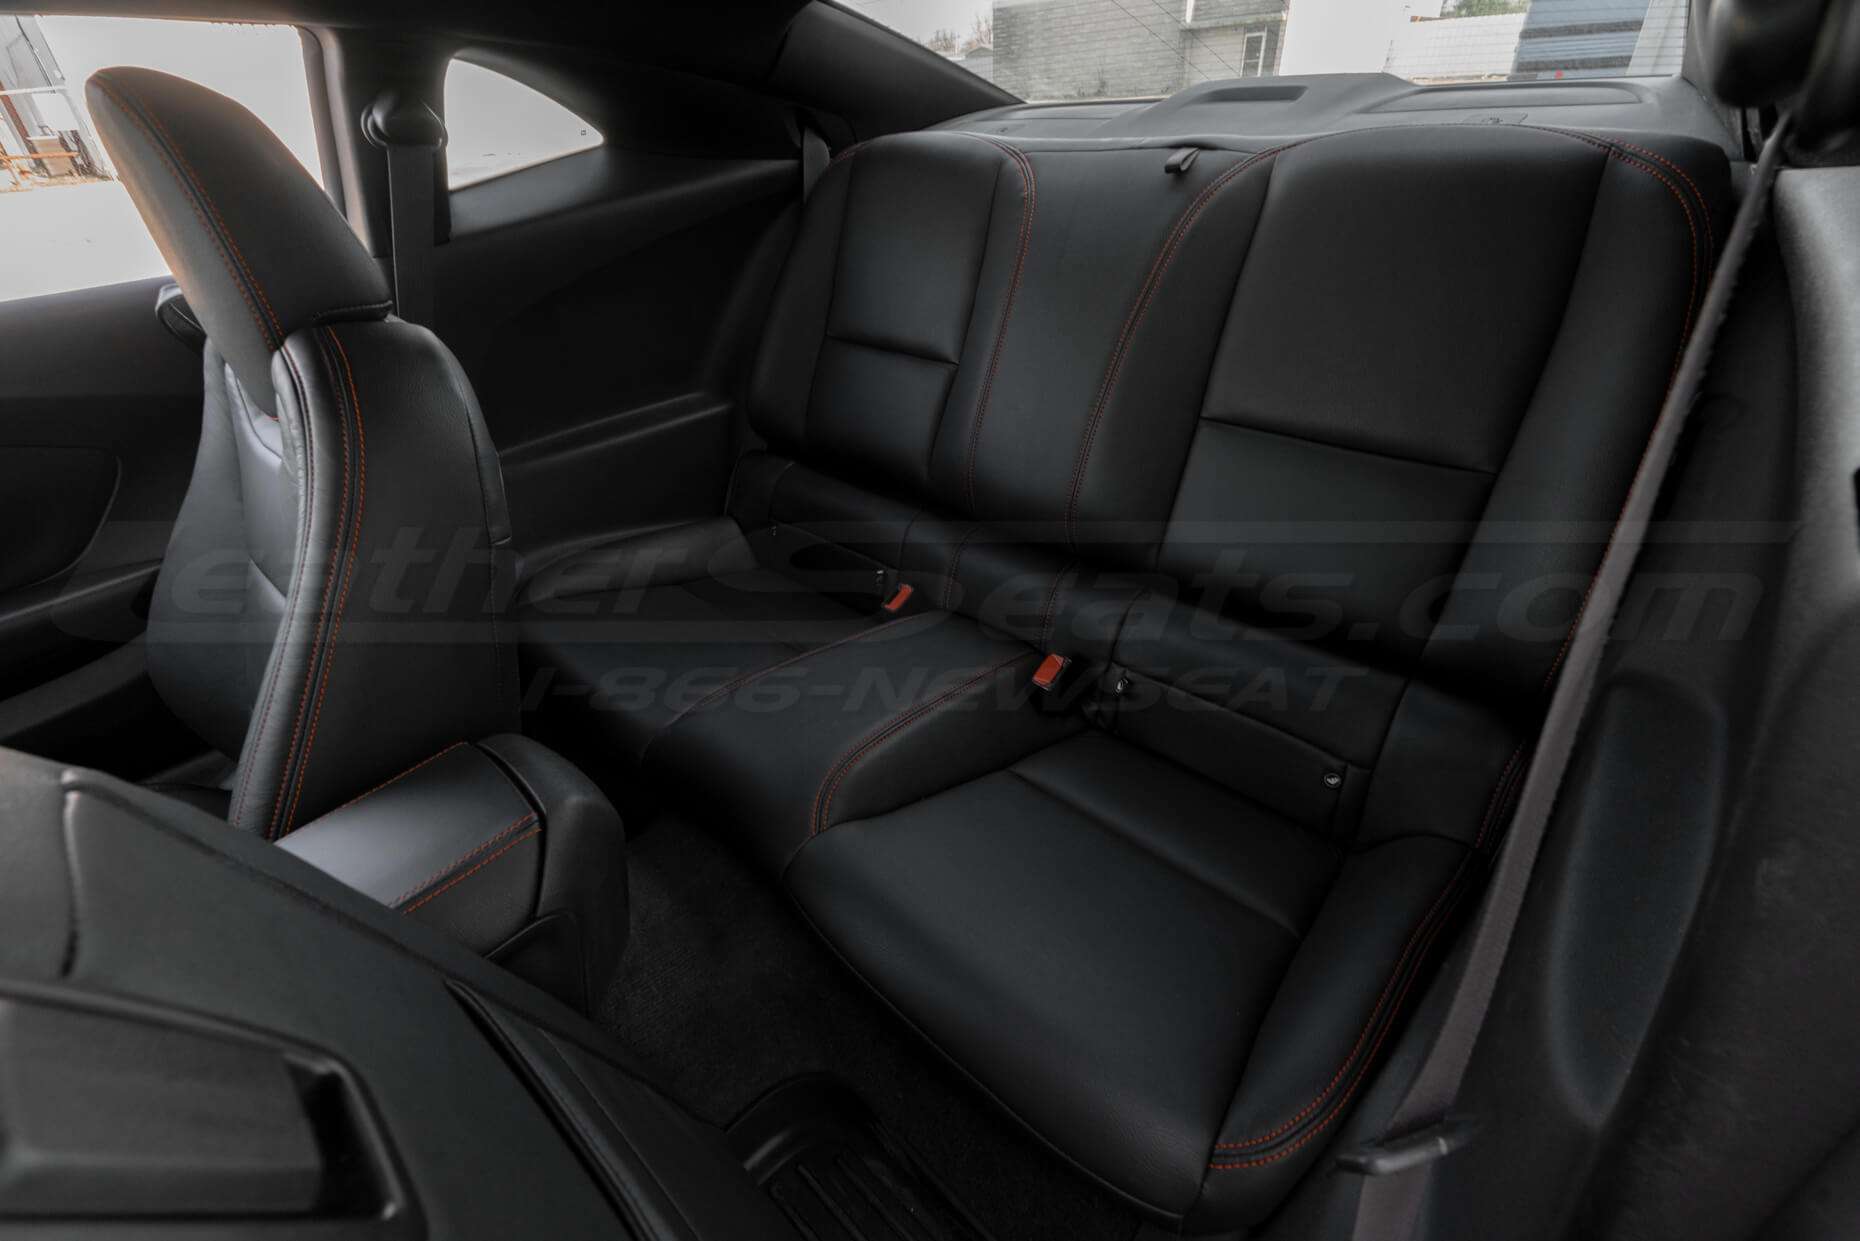 Chevy Camaro Leather Seats - Black - Installed rear seats